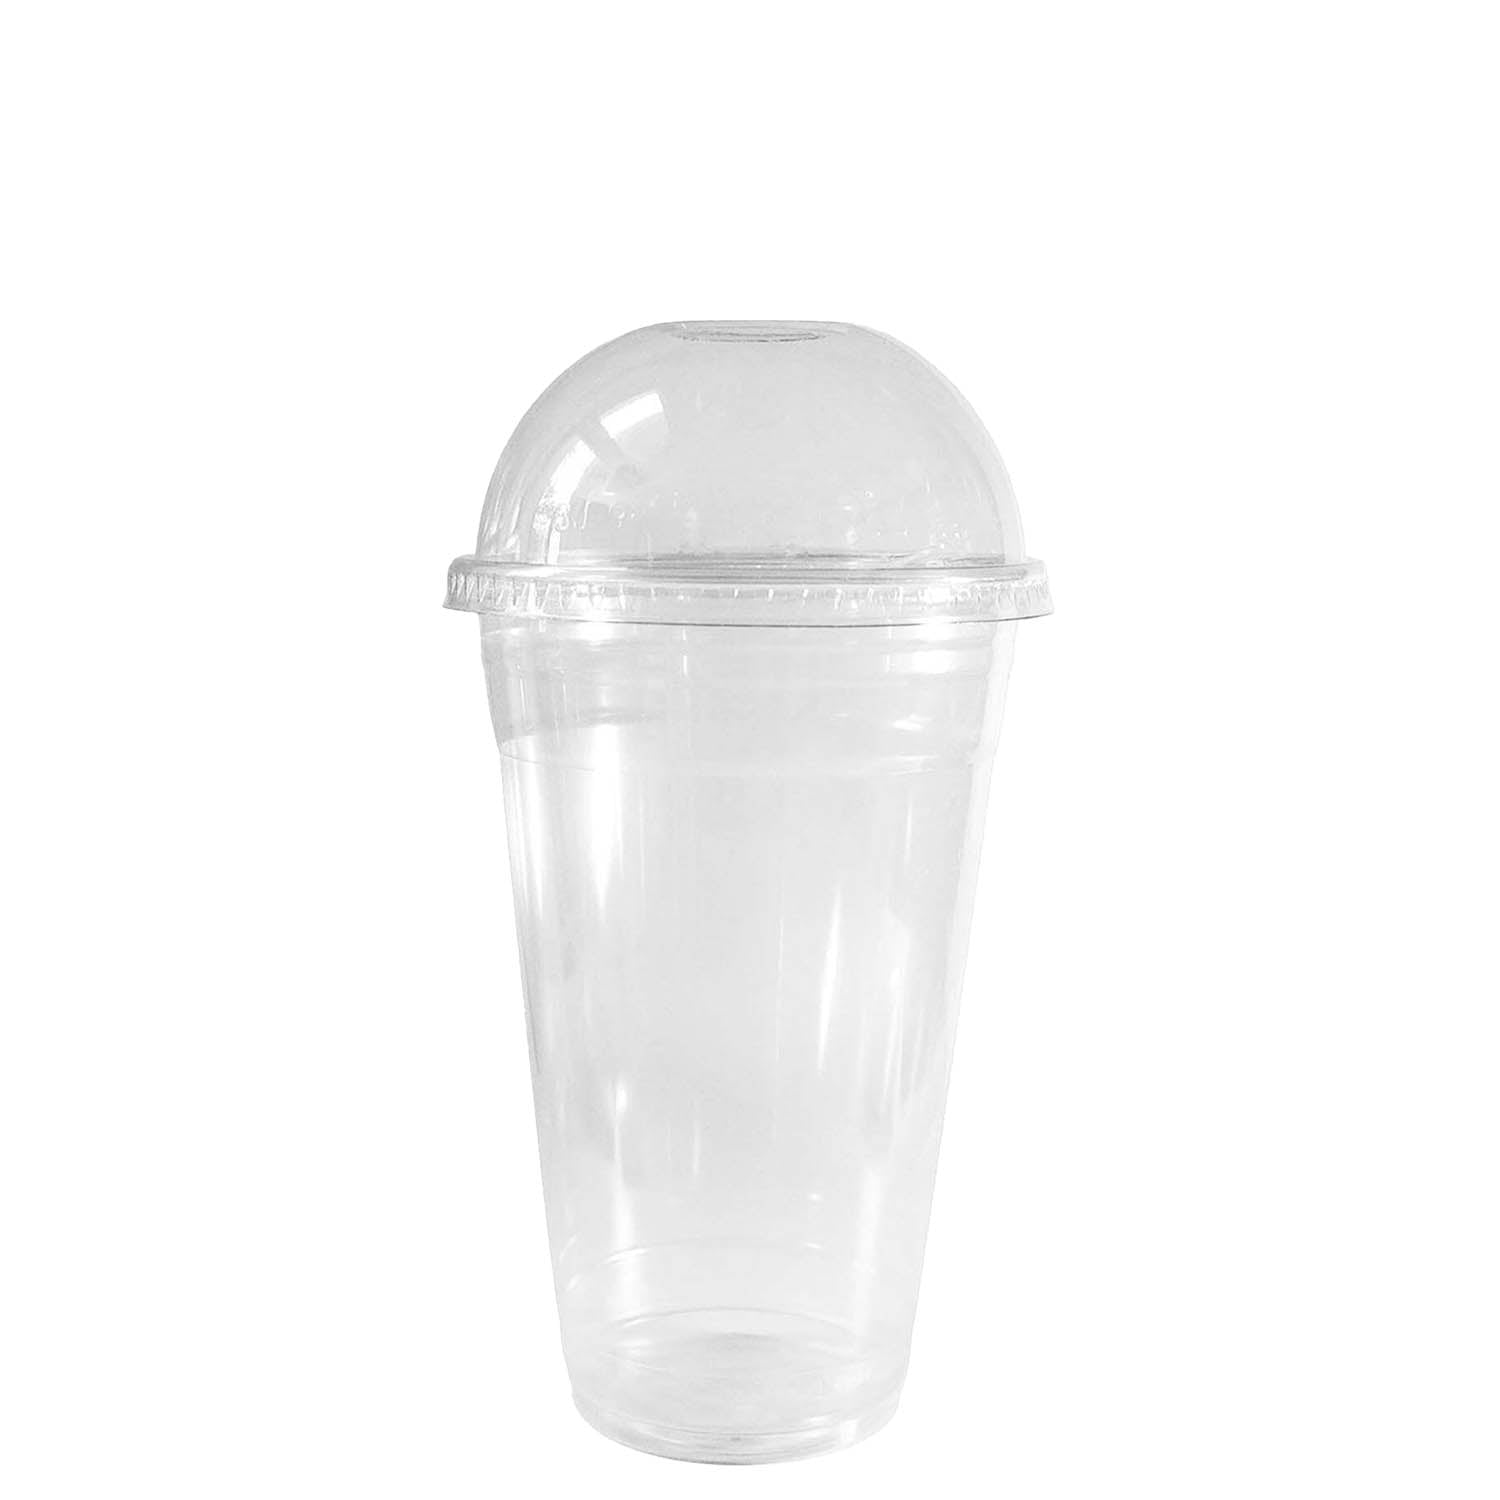 16oz Disposable Pet Clear Plastic Smoothie Cups with Clear Dome Lids